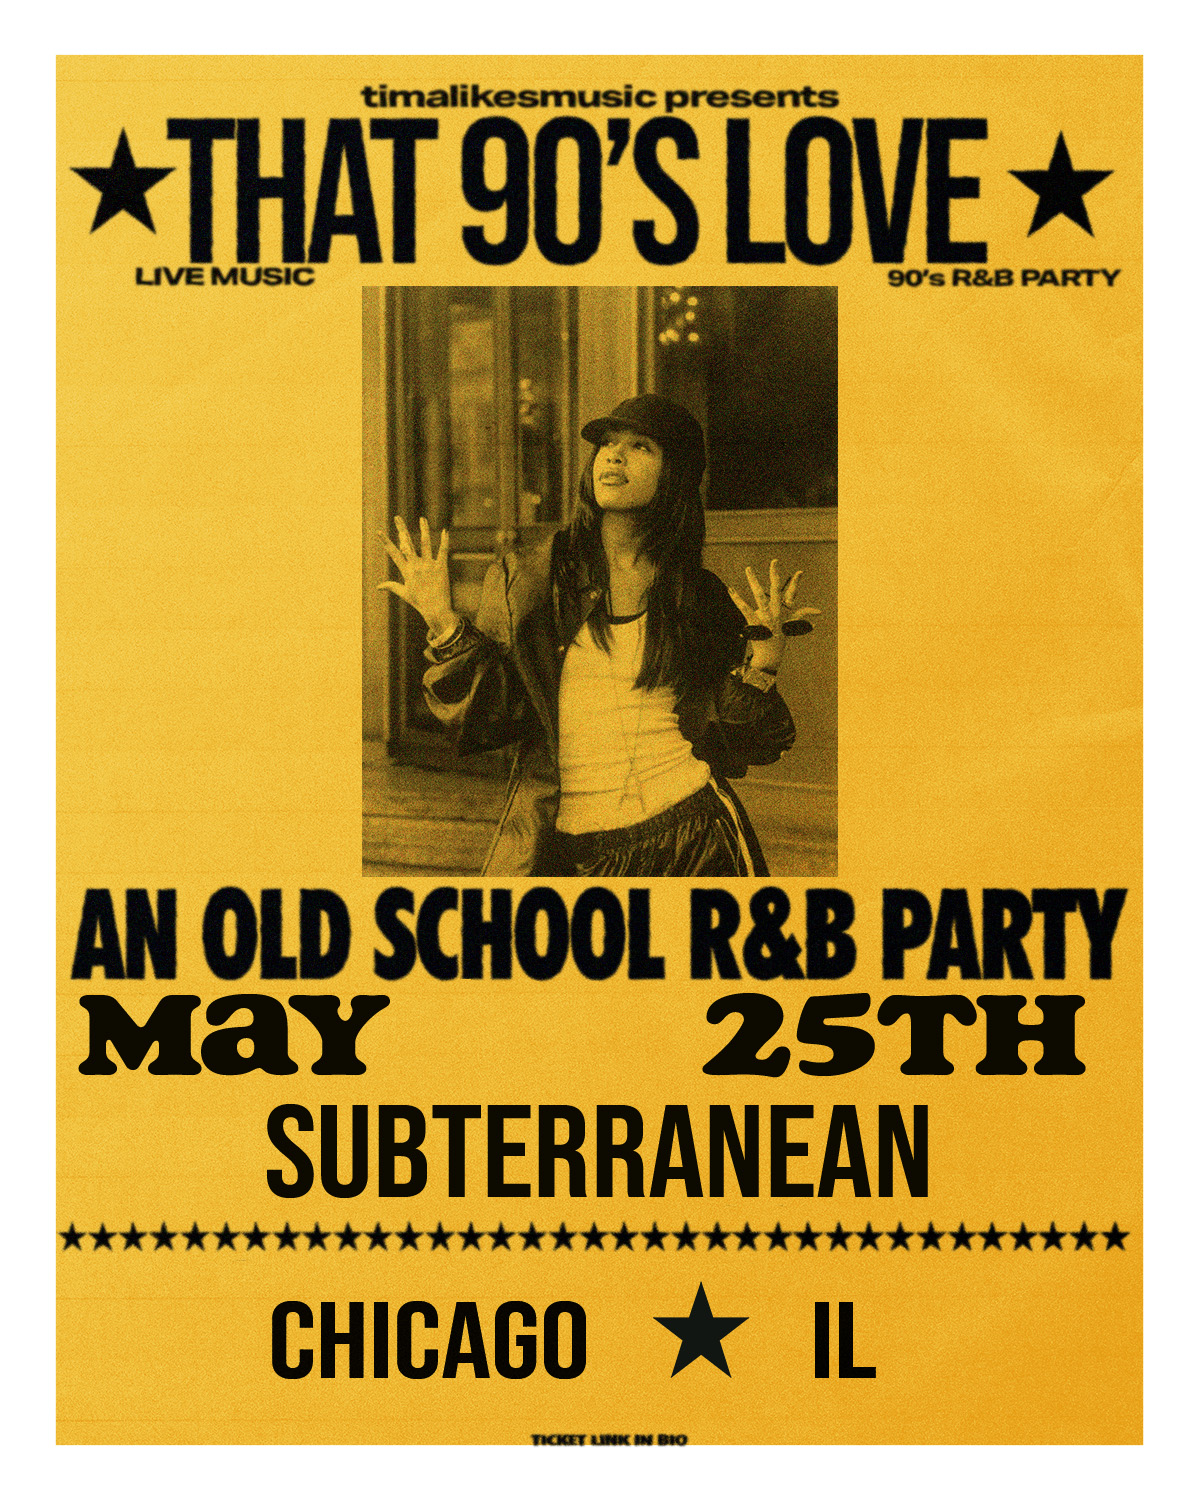 TimaLikesMusic: That 90's Love - An Old School R&B Party